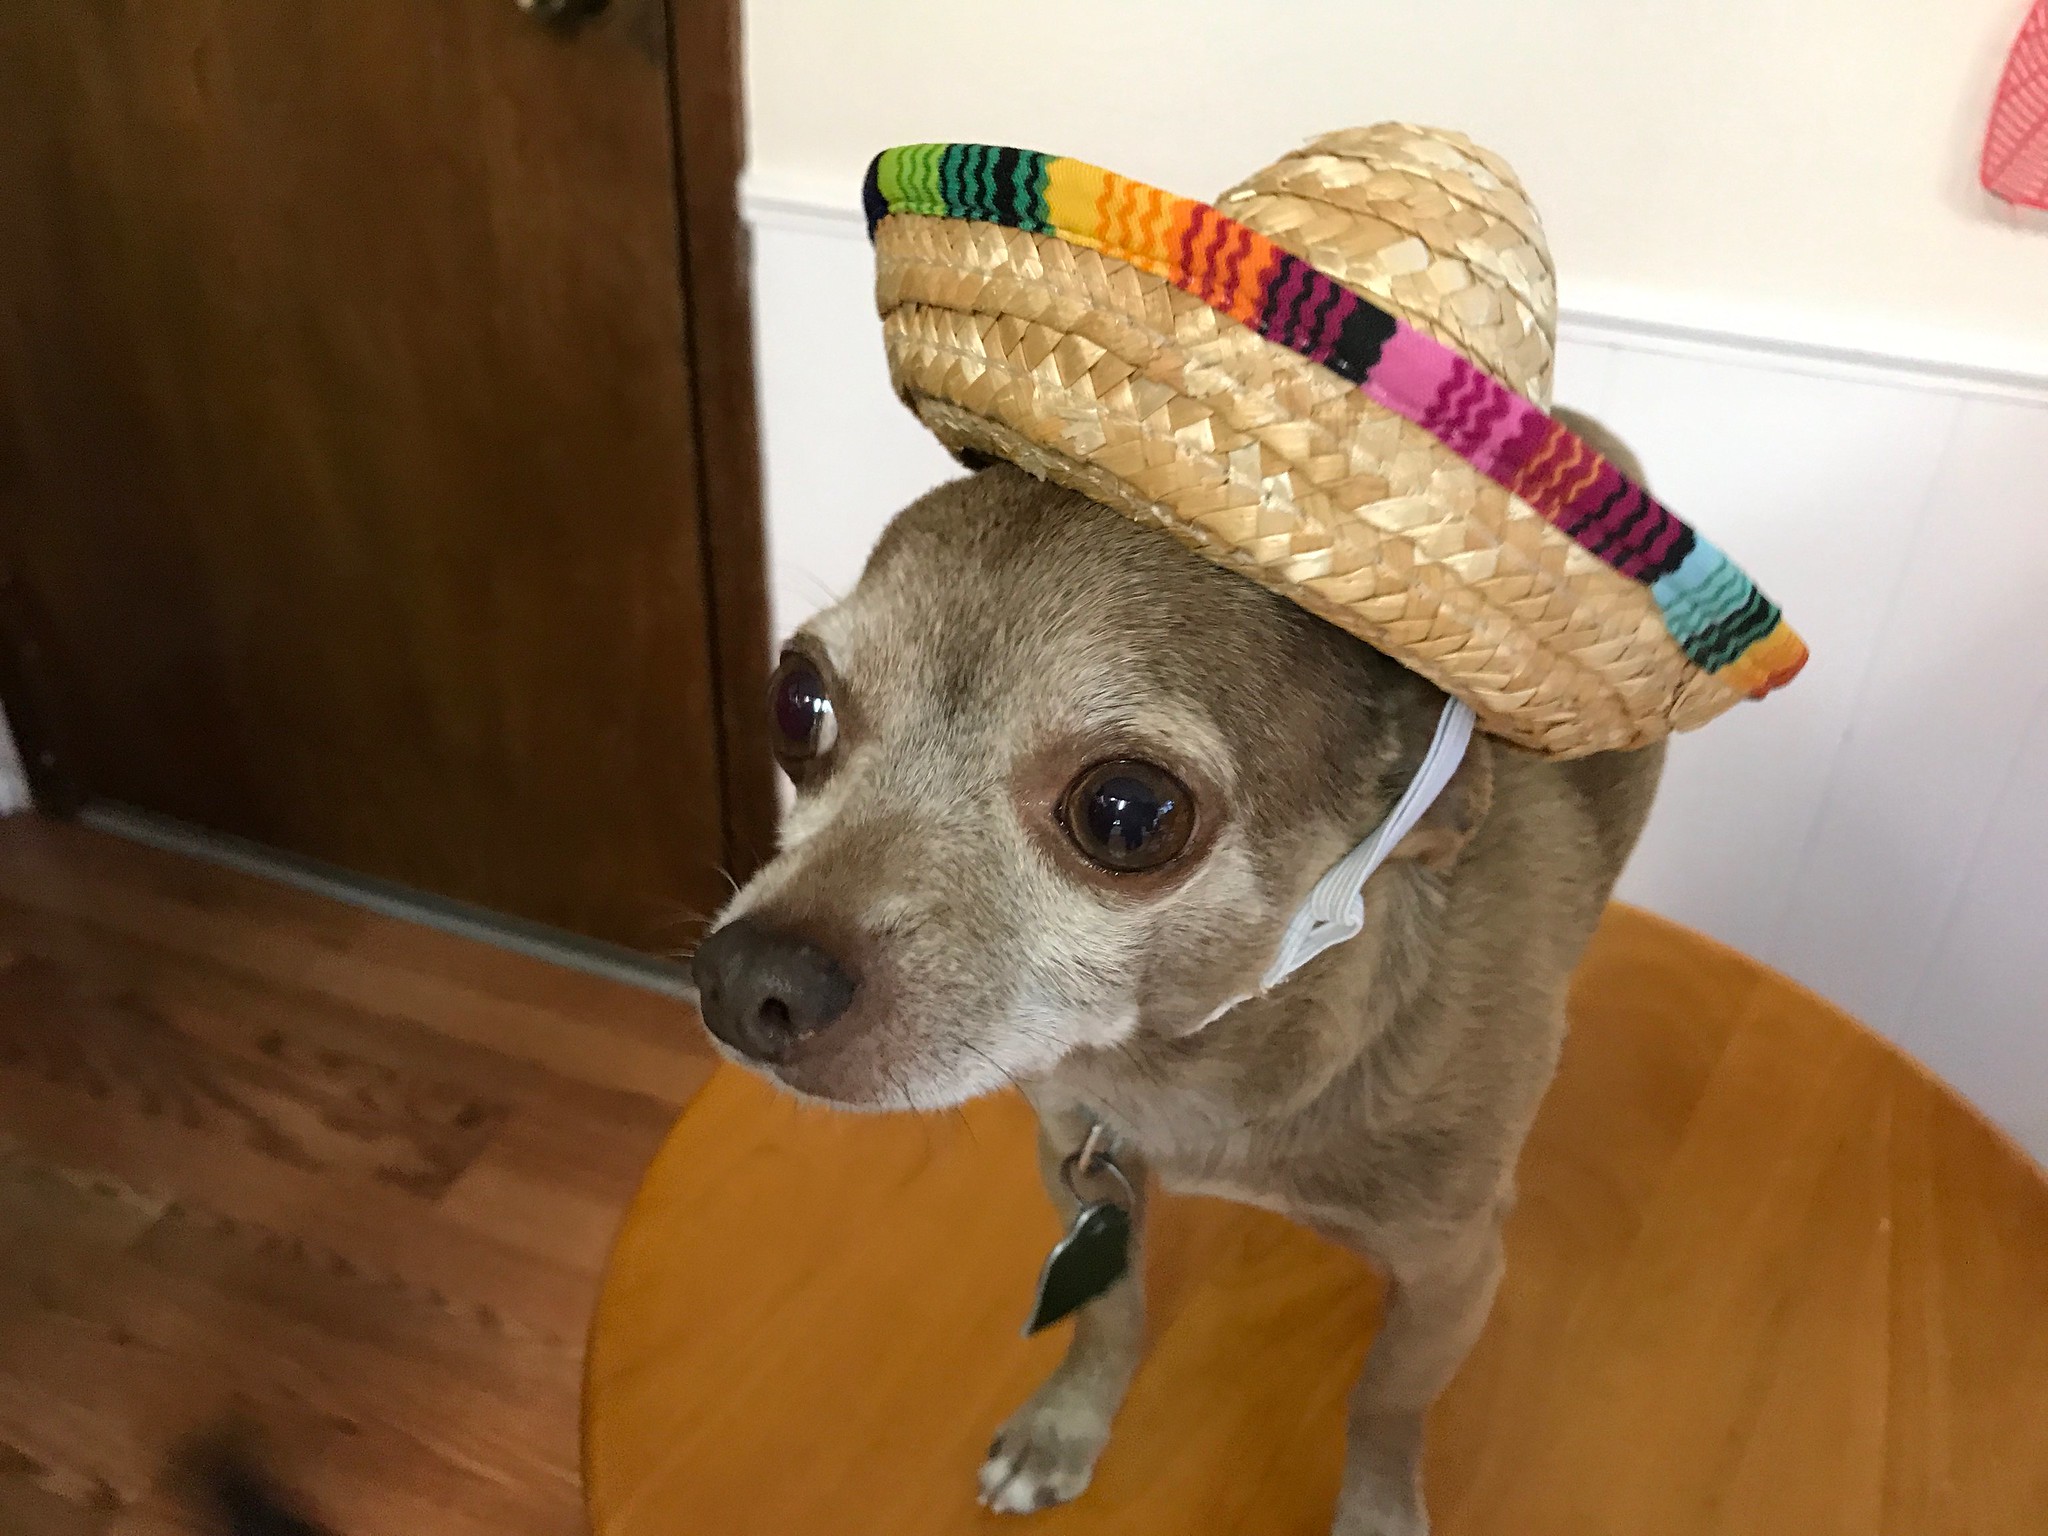 Dobby is ready for some tacos